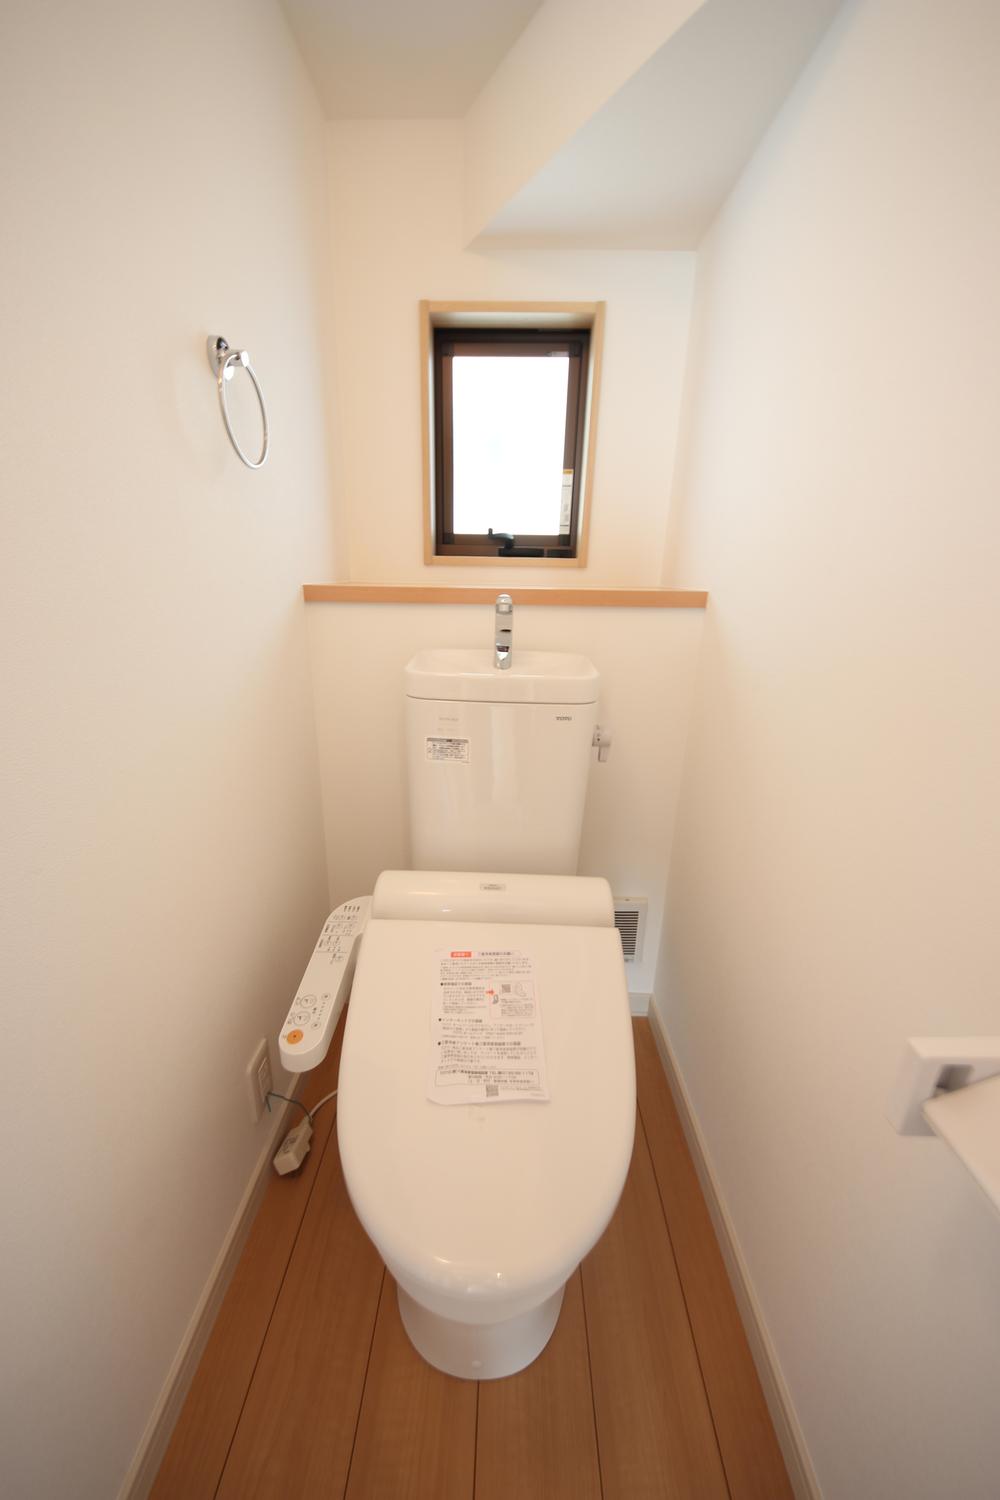 Toilet. It is the toilet of the same specification. Toilet You can install two places. One place is Washlet, Two places first is warm toilet is standard construction.